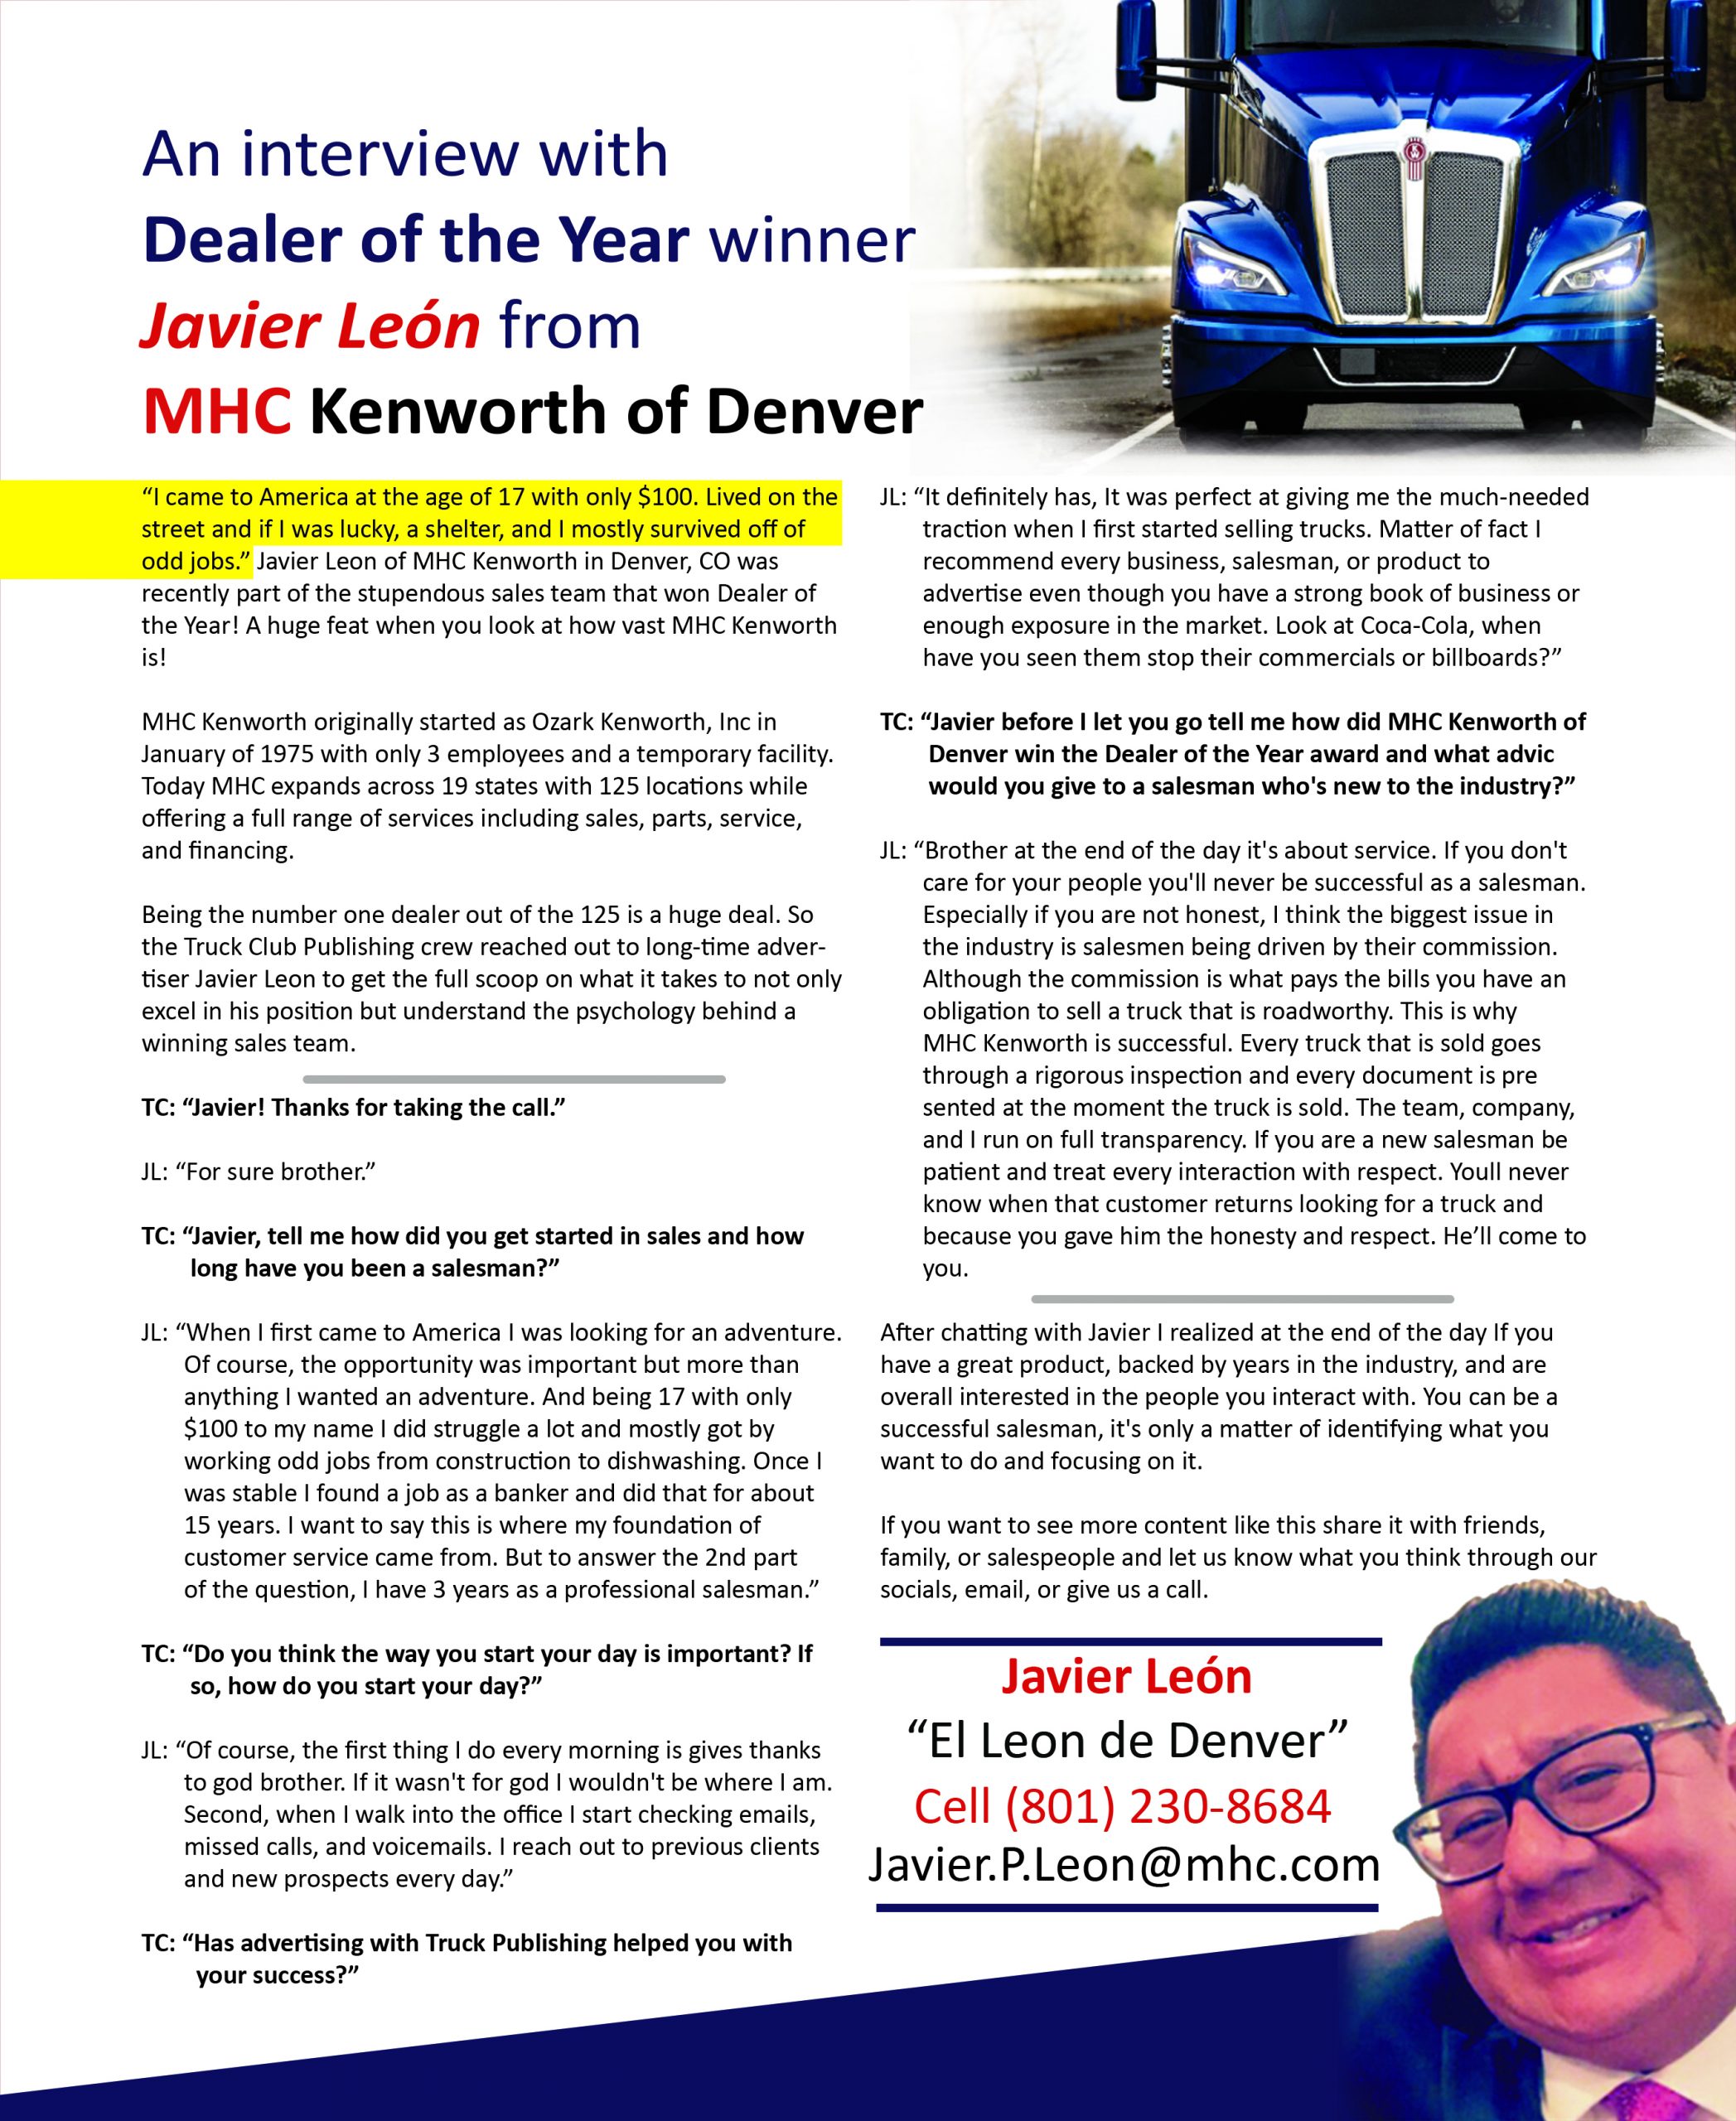 Article Dealer of the Year